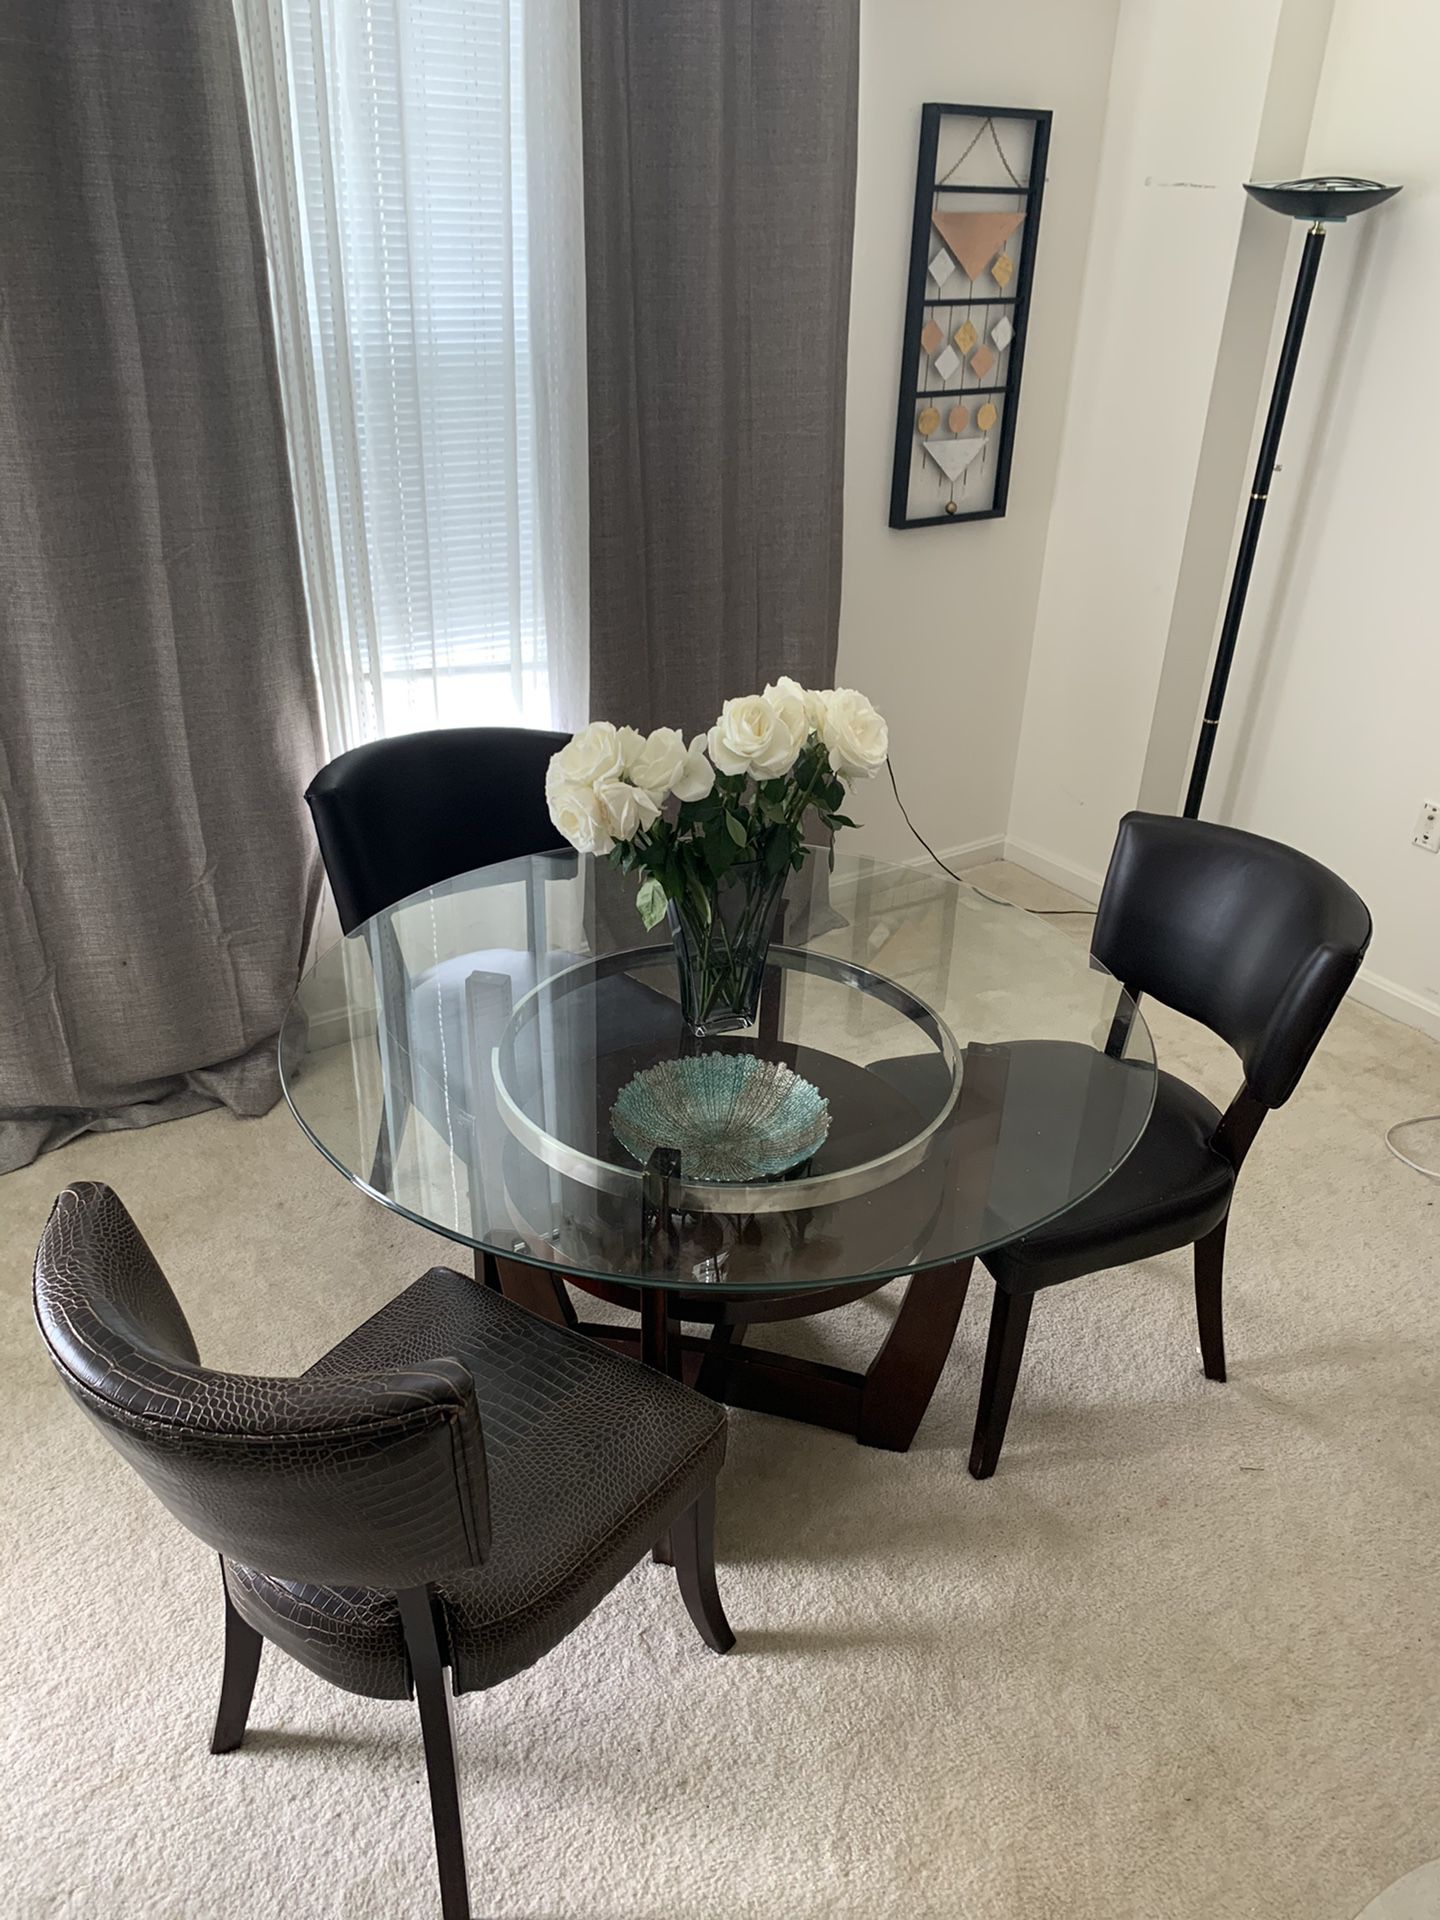 Round dining table & 4 chairs